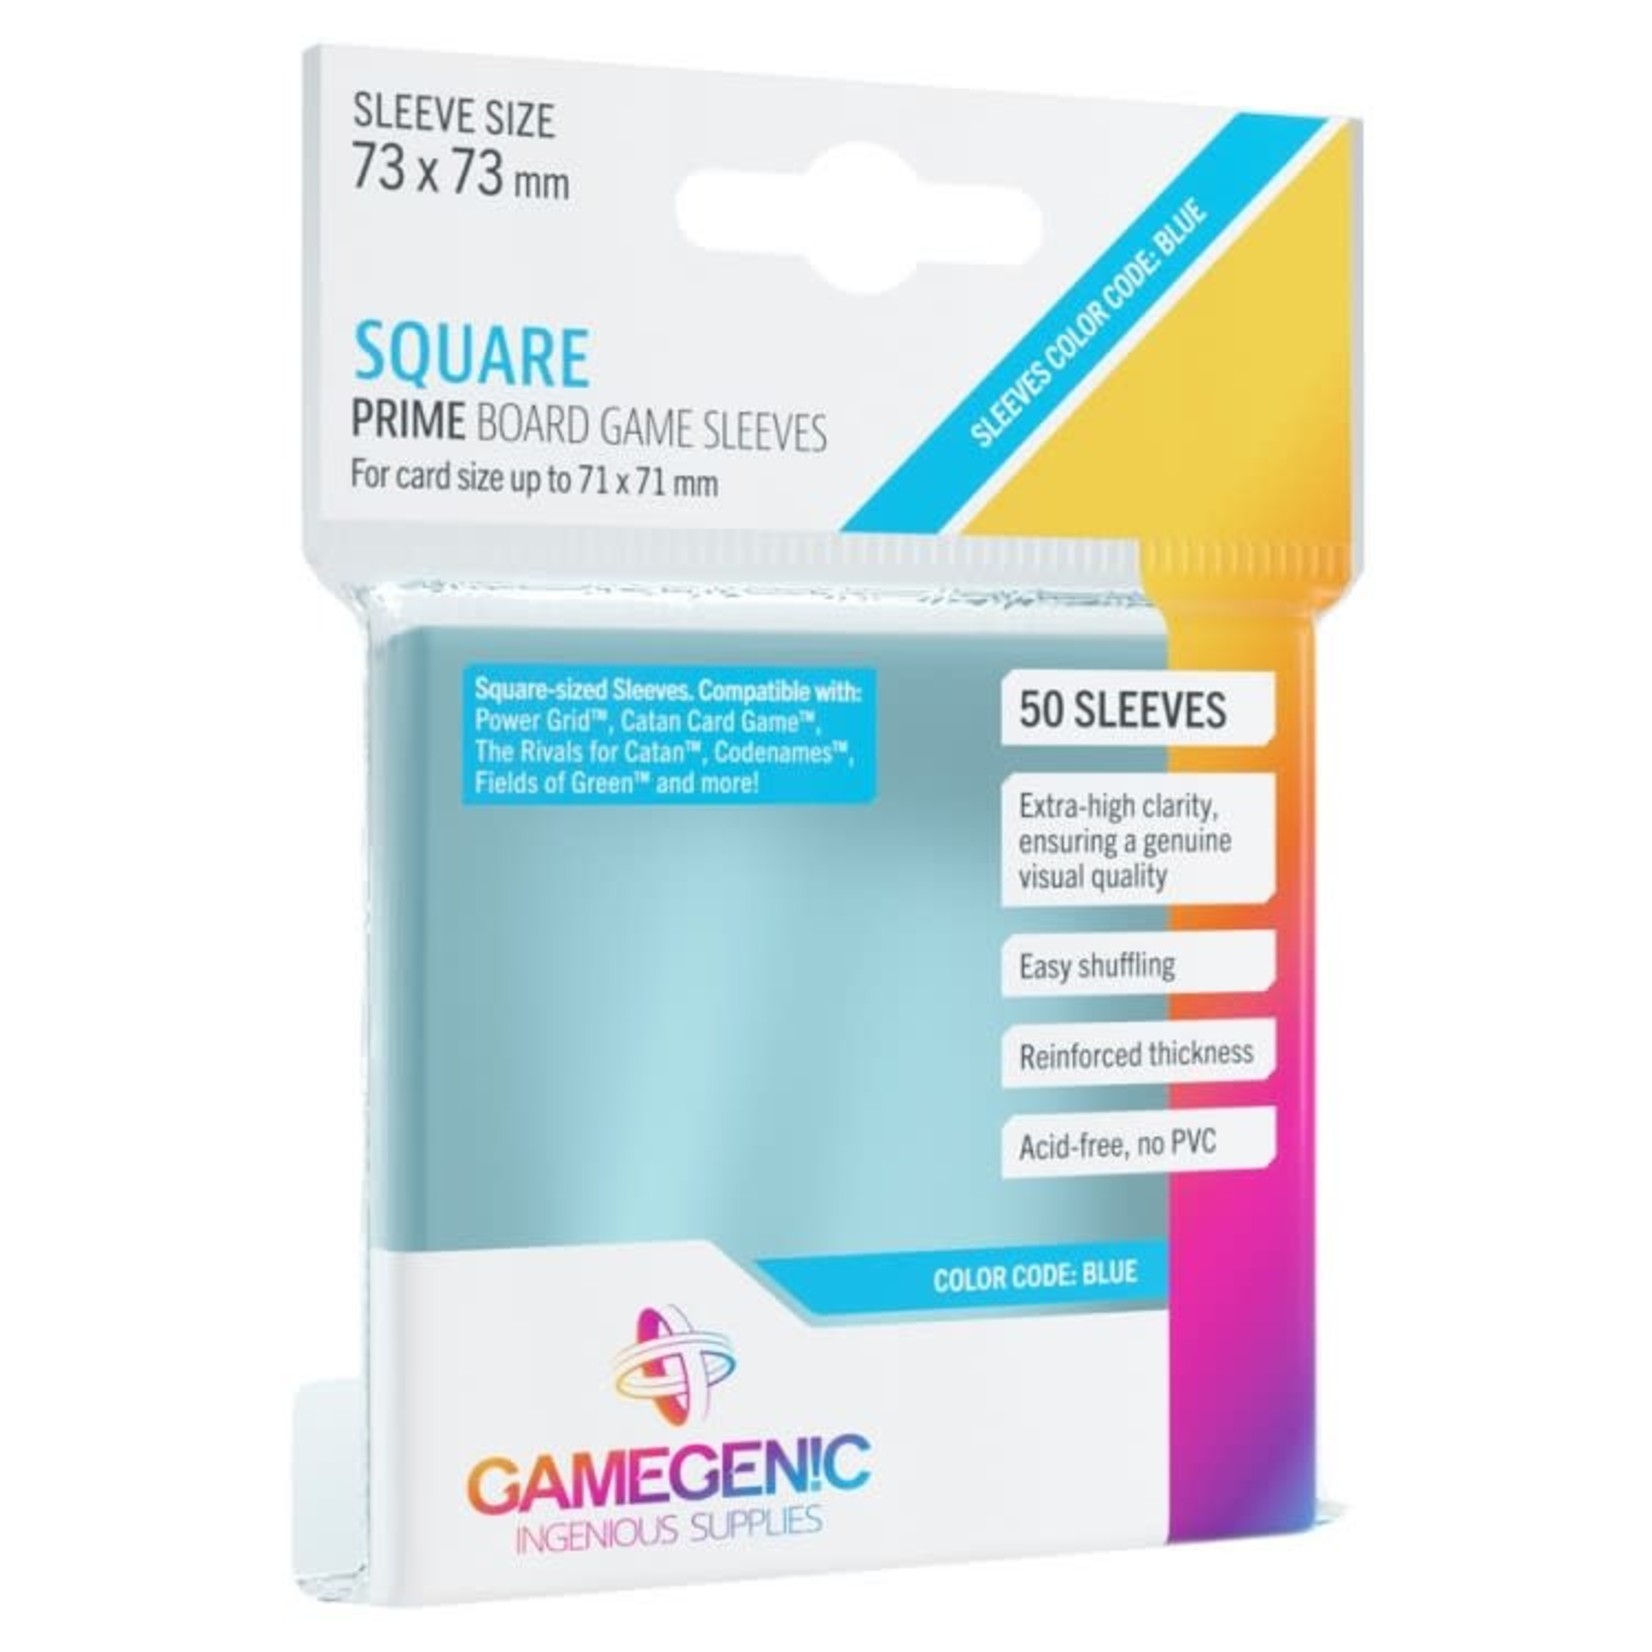 Gamegenic GameGenic 73 x 73 mm Prime Sleeves Square 50 ct